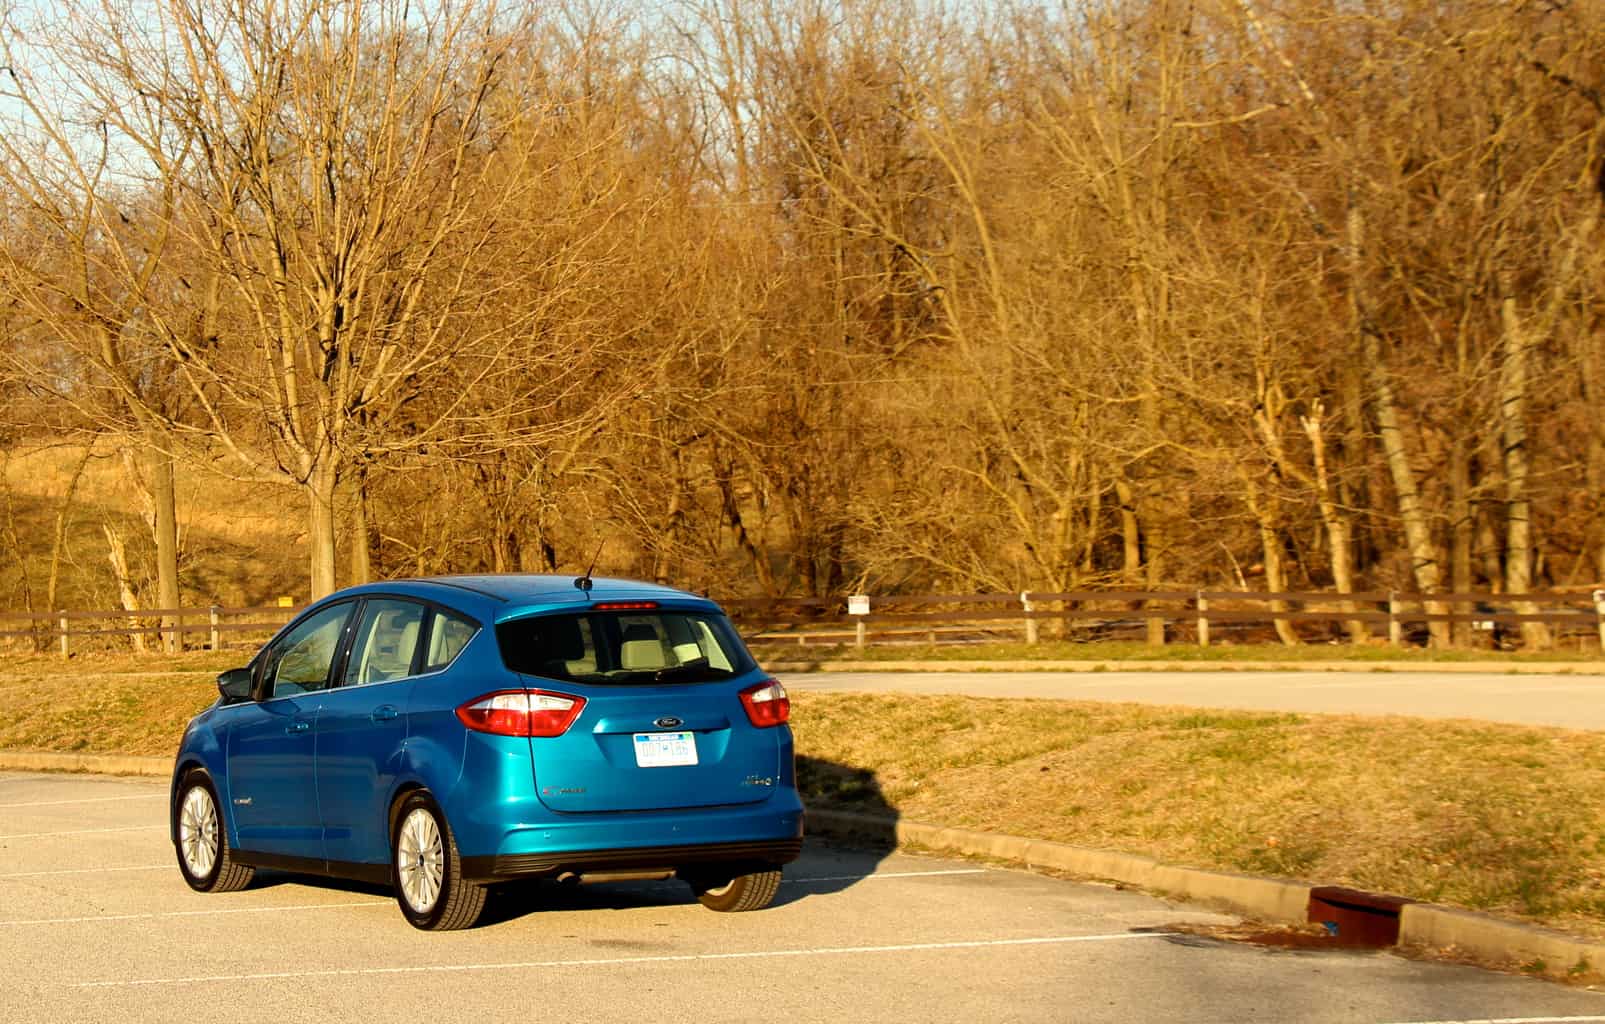 American Auto Reviews: A Hybrid Car Made in the USA – The 2013 Ford C-Max Hybrid